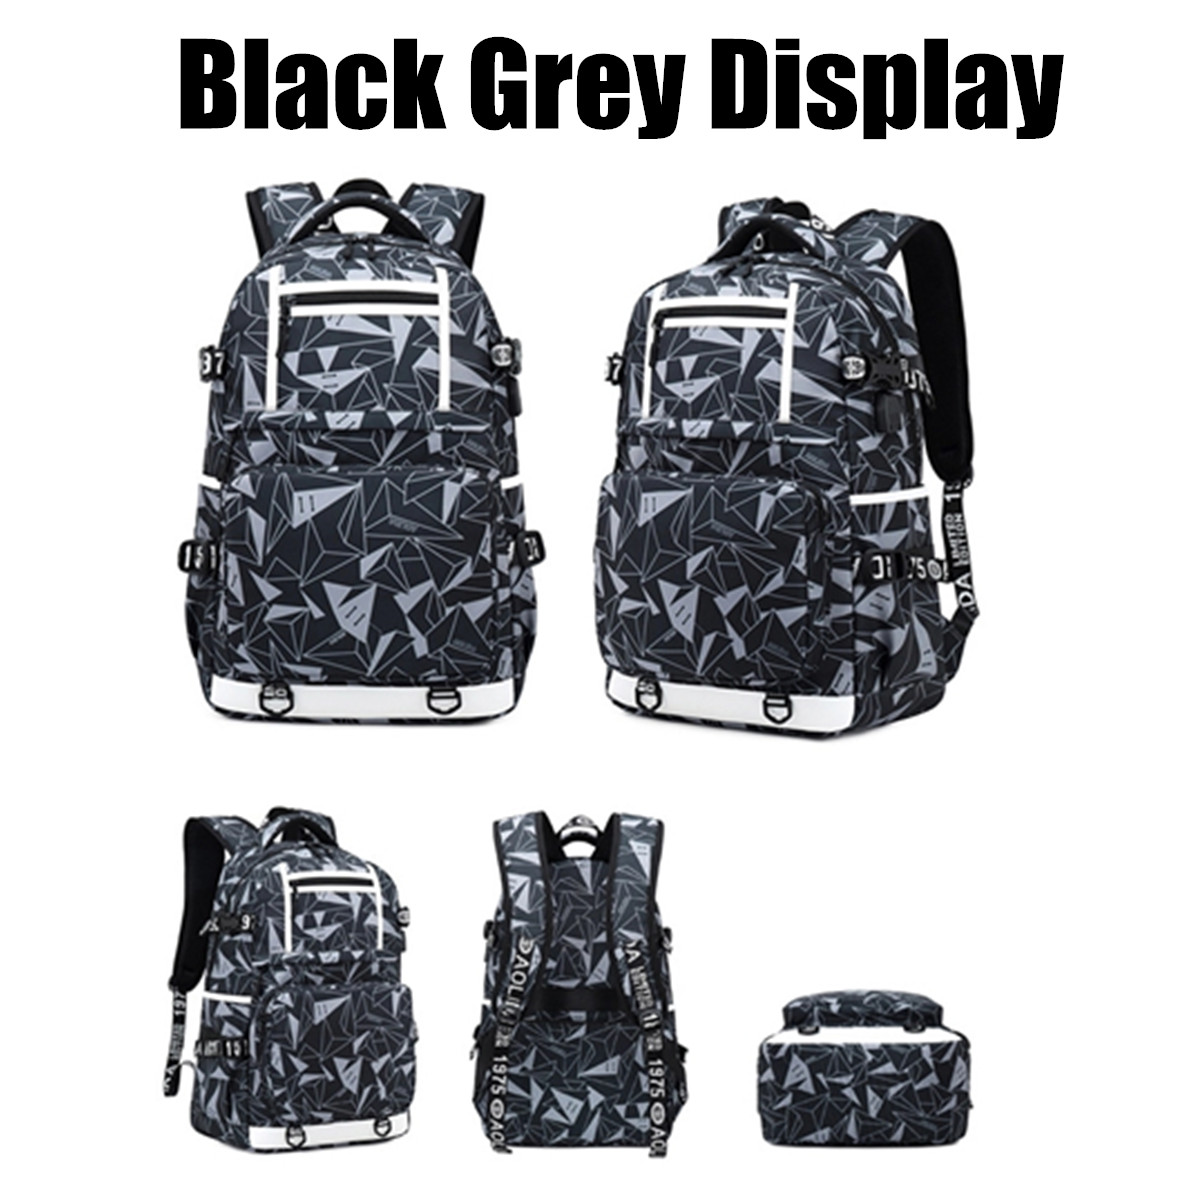 Oxford-Cloth-Waterproof-Laptop-Bag-Backpack-Travel-Bag-With-External-USB-Charging-Port-1509426-11